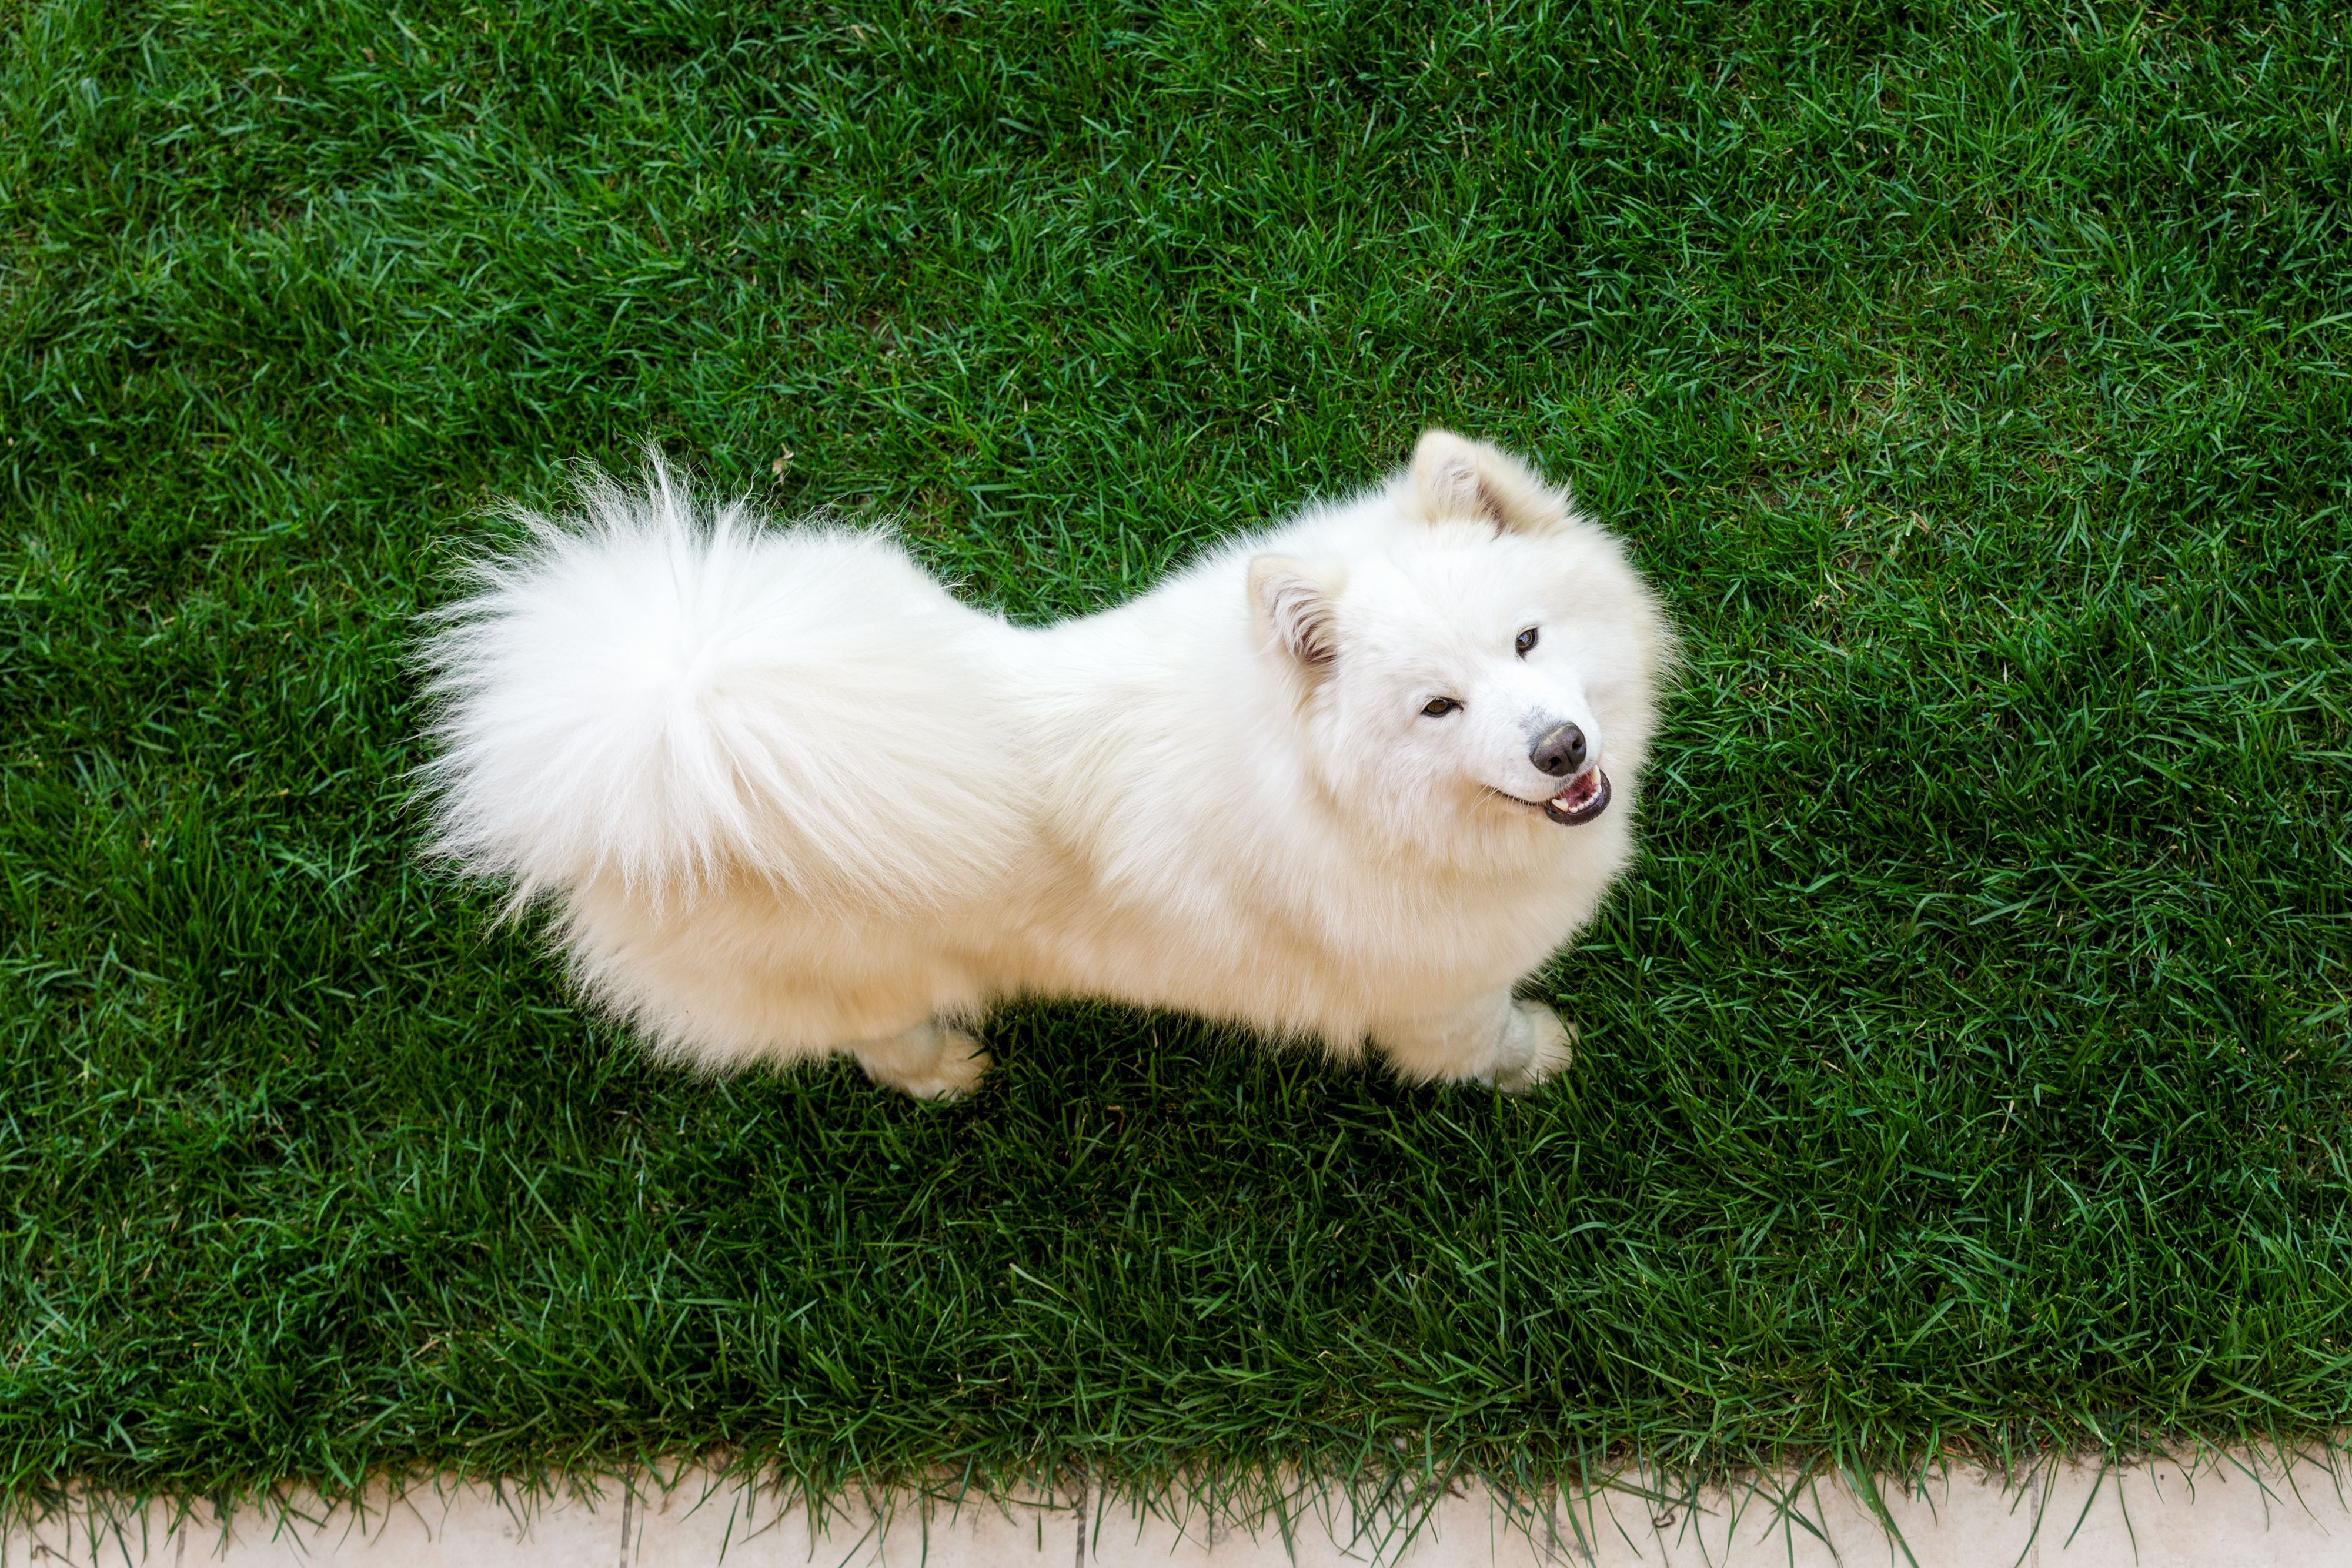 A Samoyed with a beautiful long hypoallergenic coat